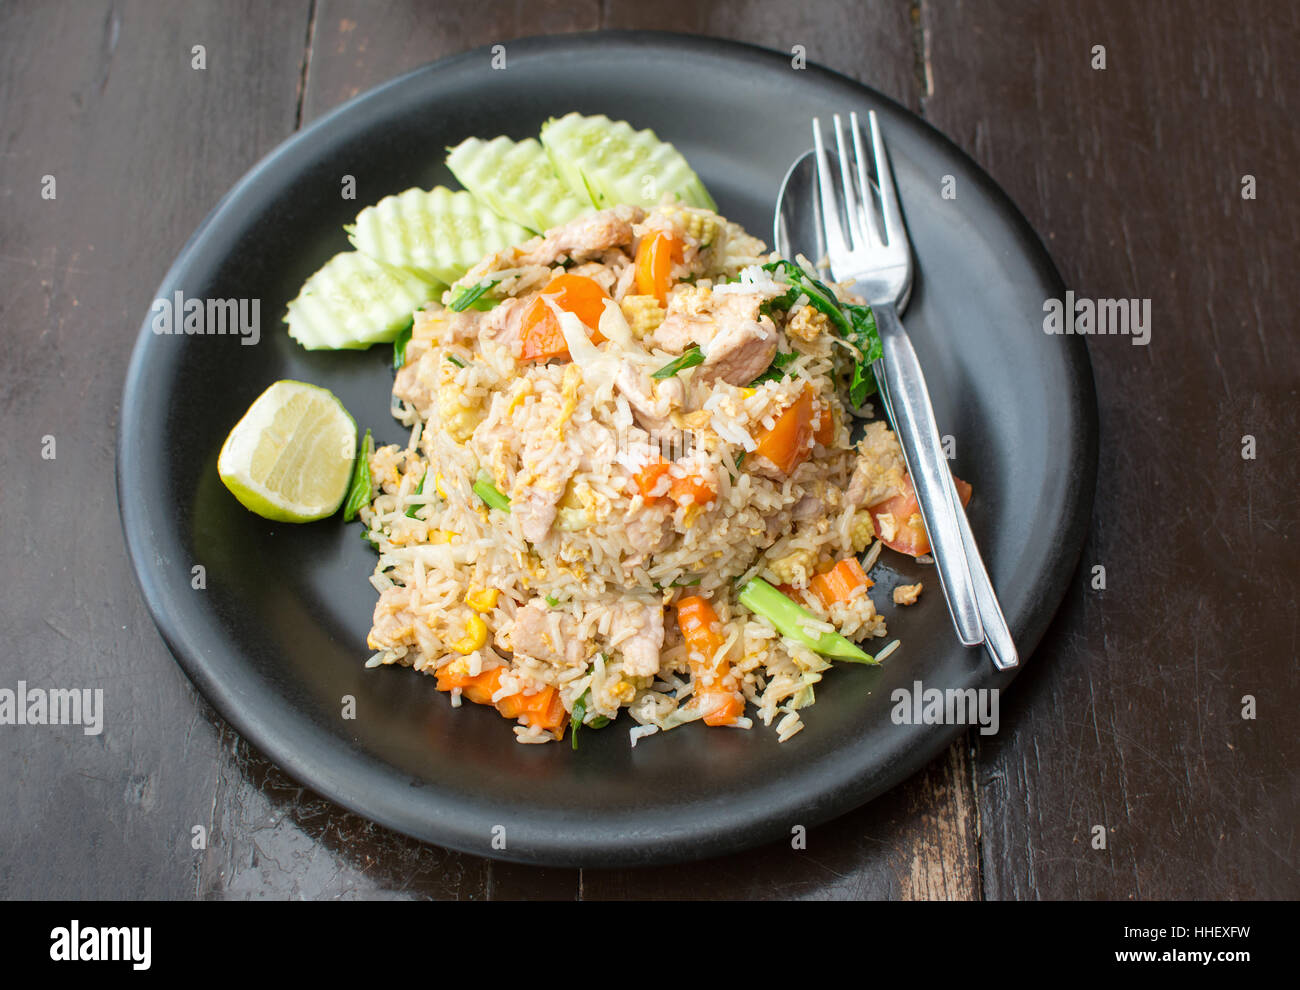 Fried rice with meat and vegetables served on a plate Stock Photo